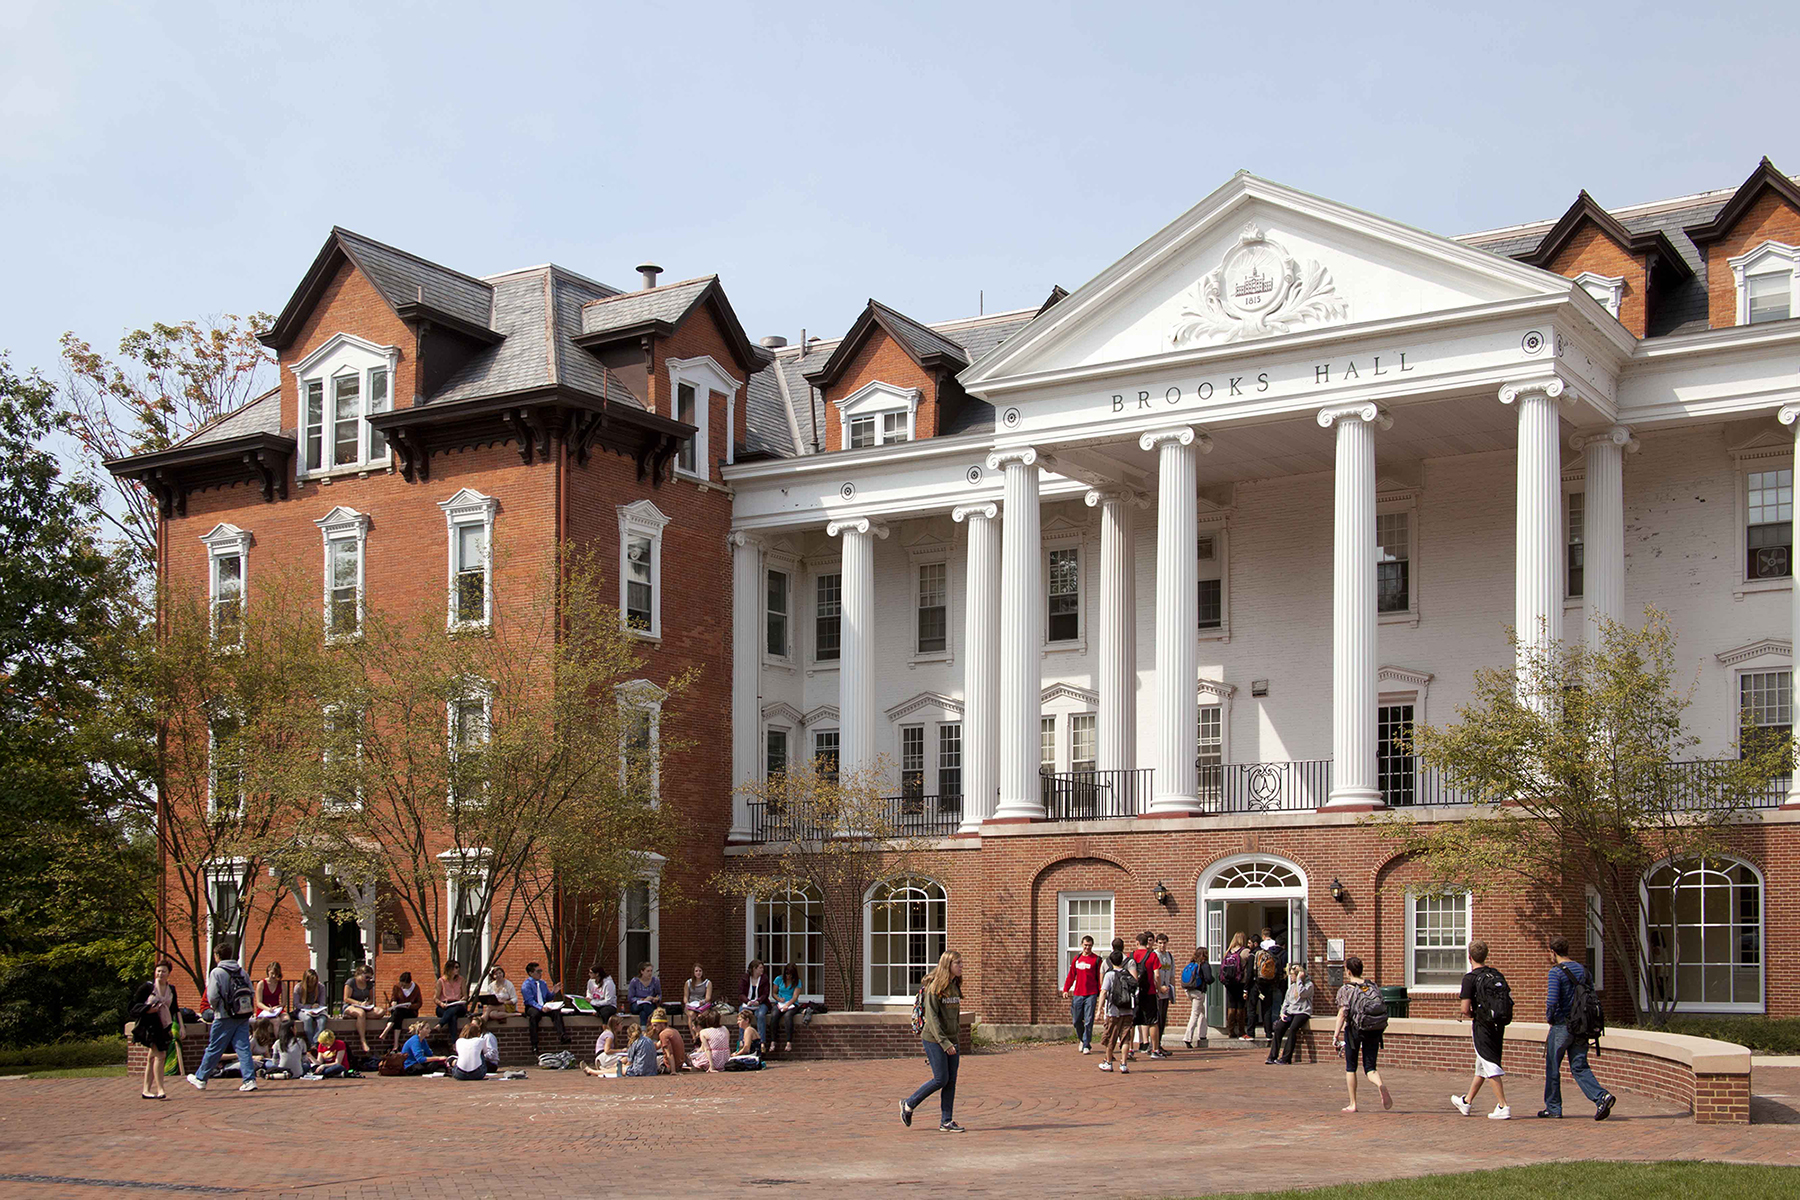 Students studying and walking in front of Brooks Hall during the day